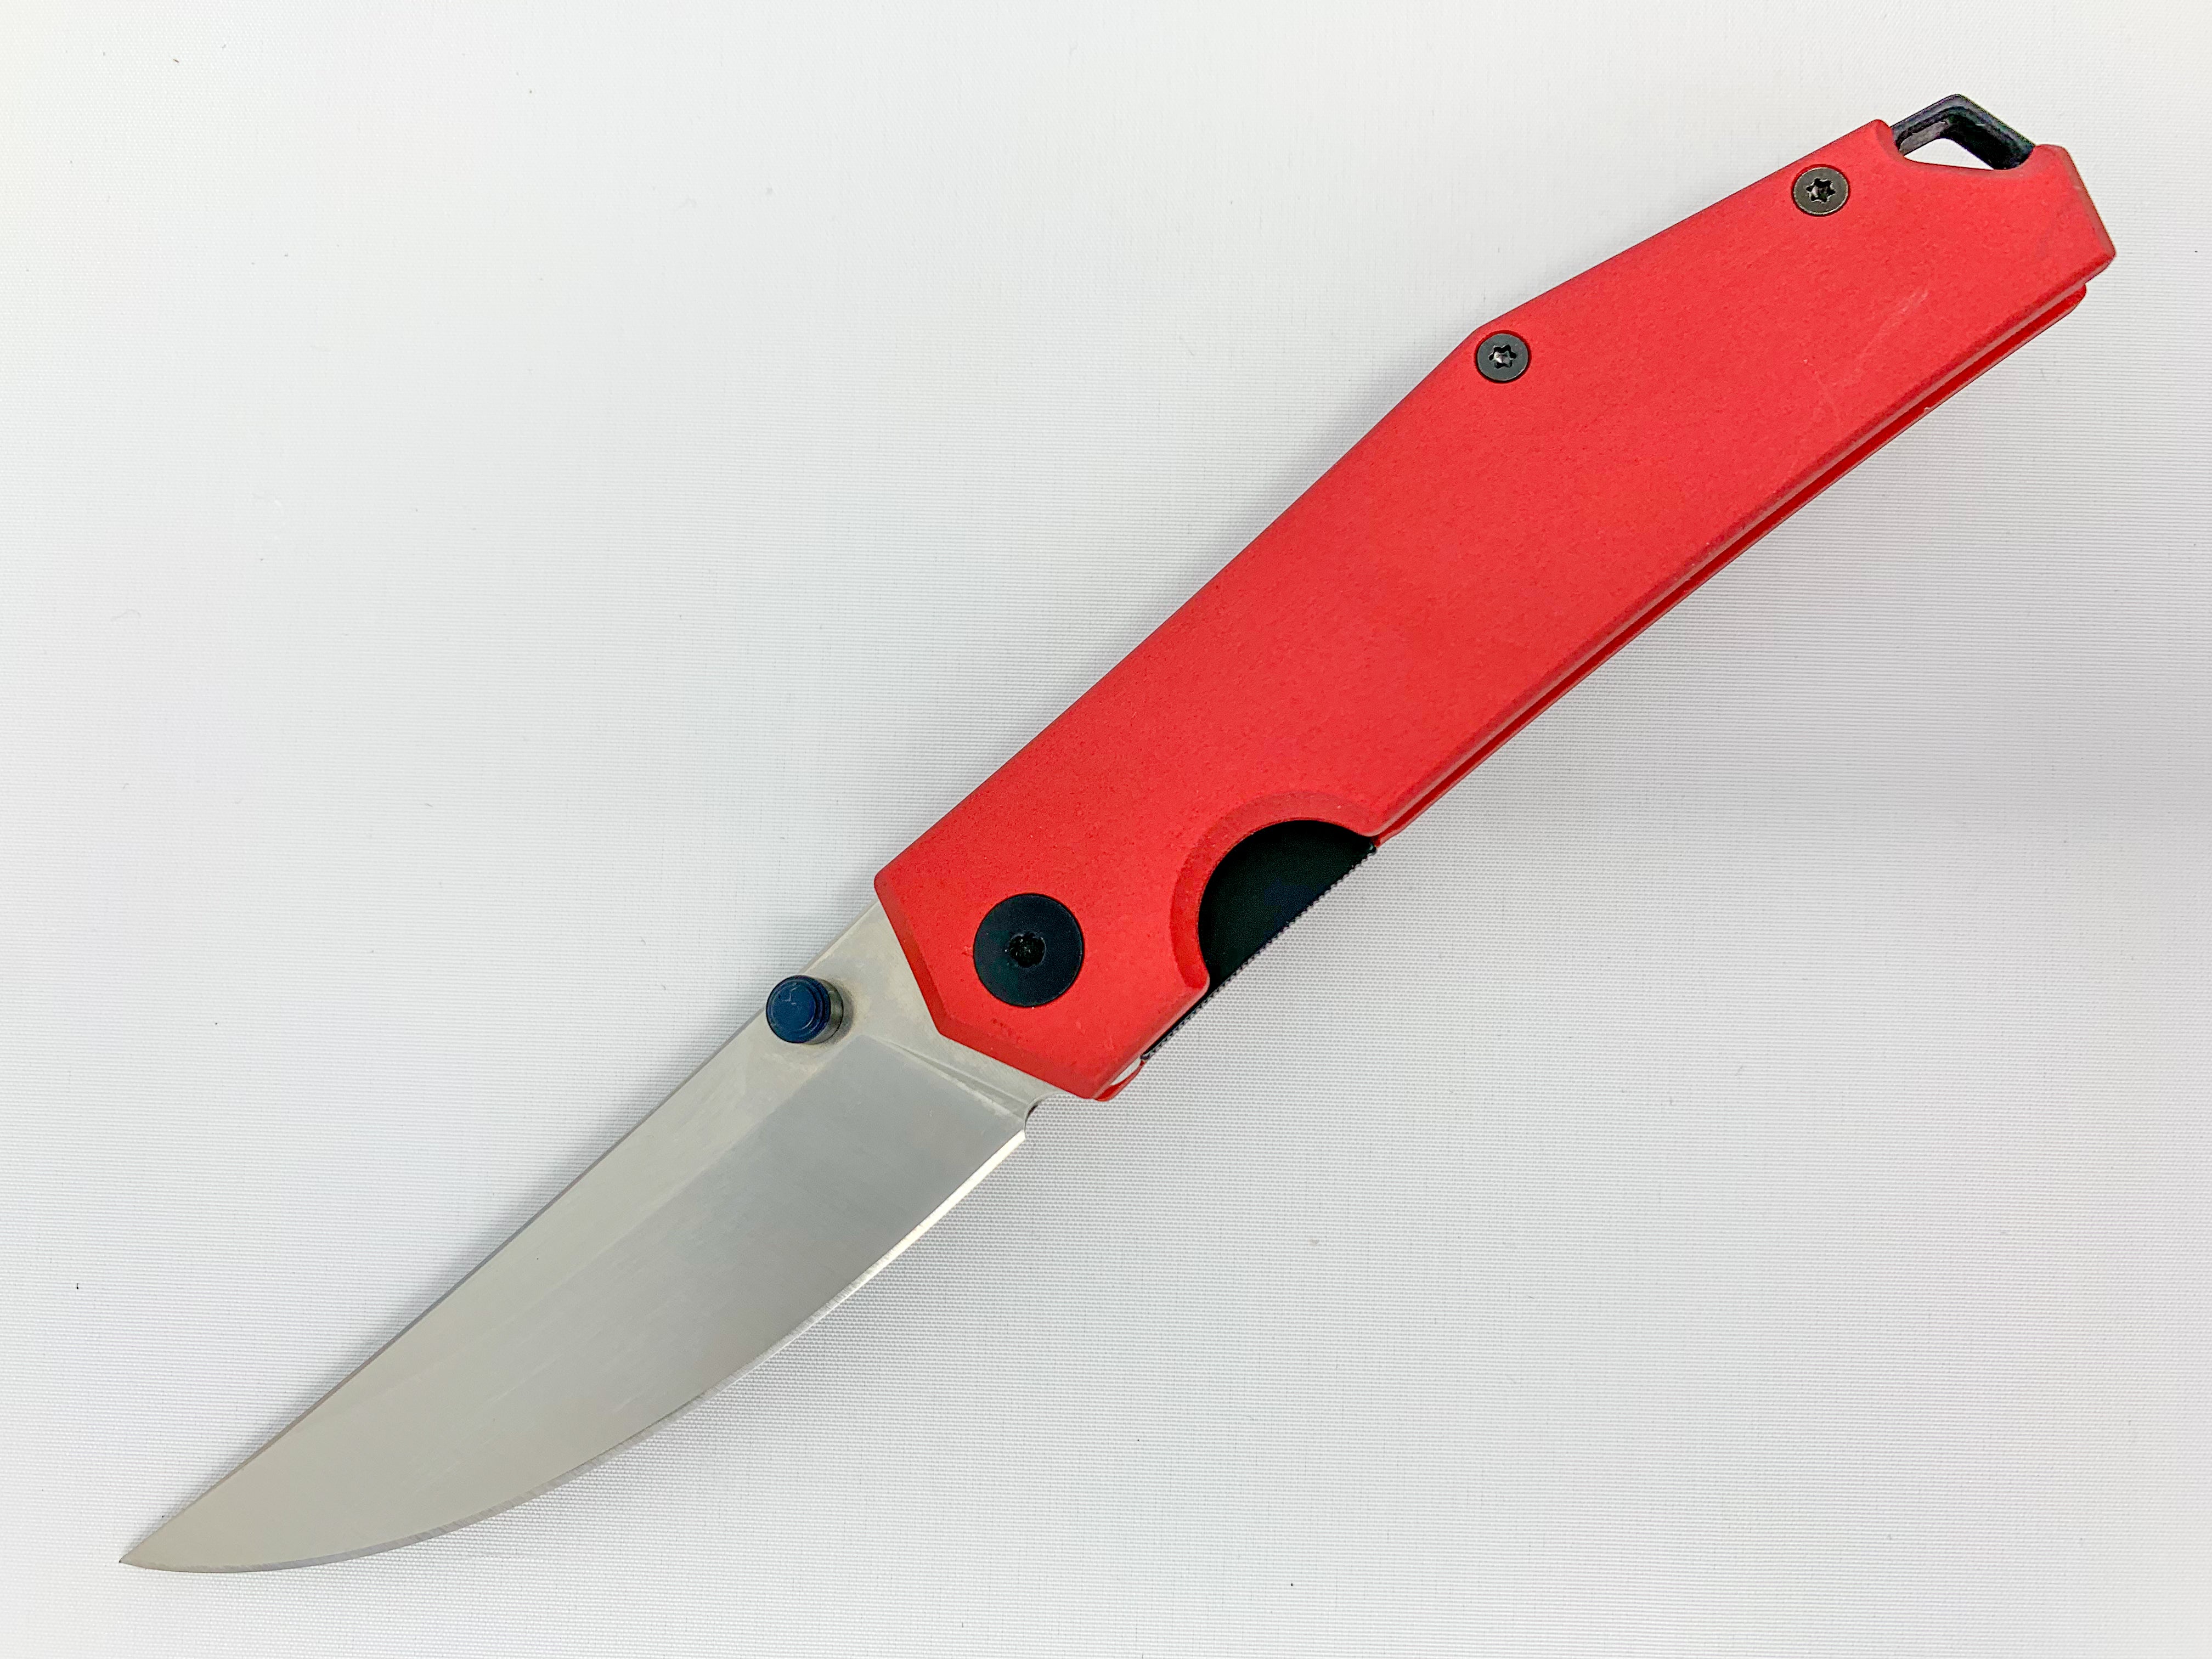 GiantMouse ACE Clyde - Red Aluminum with Black Thumbstud and Backspacer - N690 Blade - CLOSEOUT